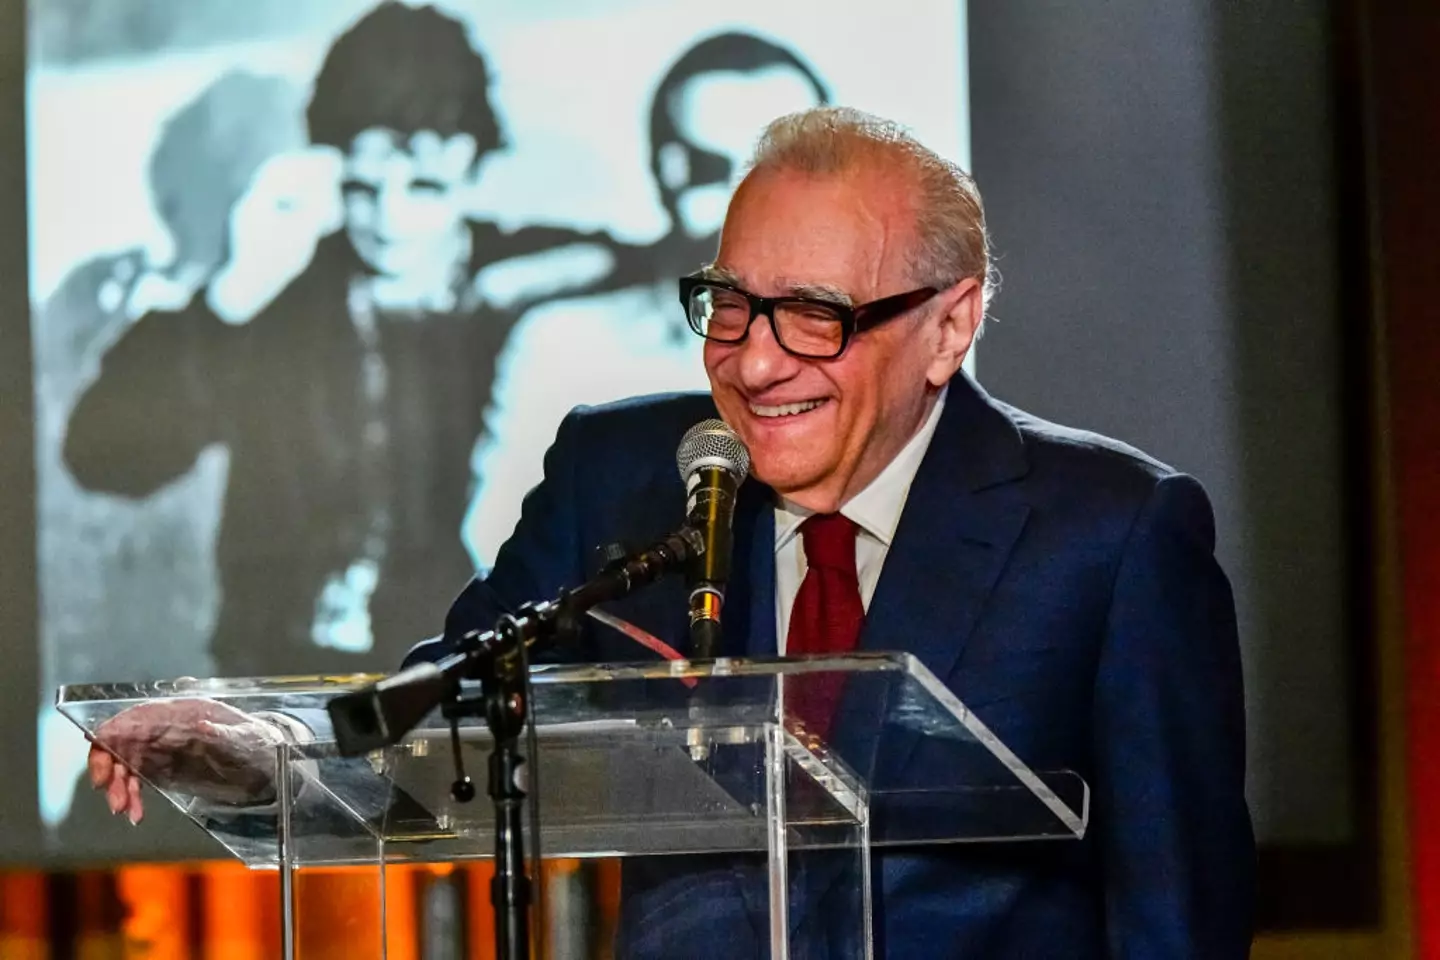 Martin Scorsese has revealed his top 5 films.